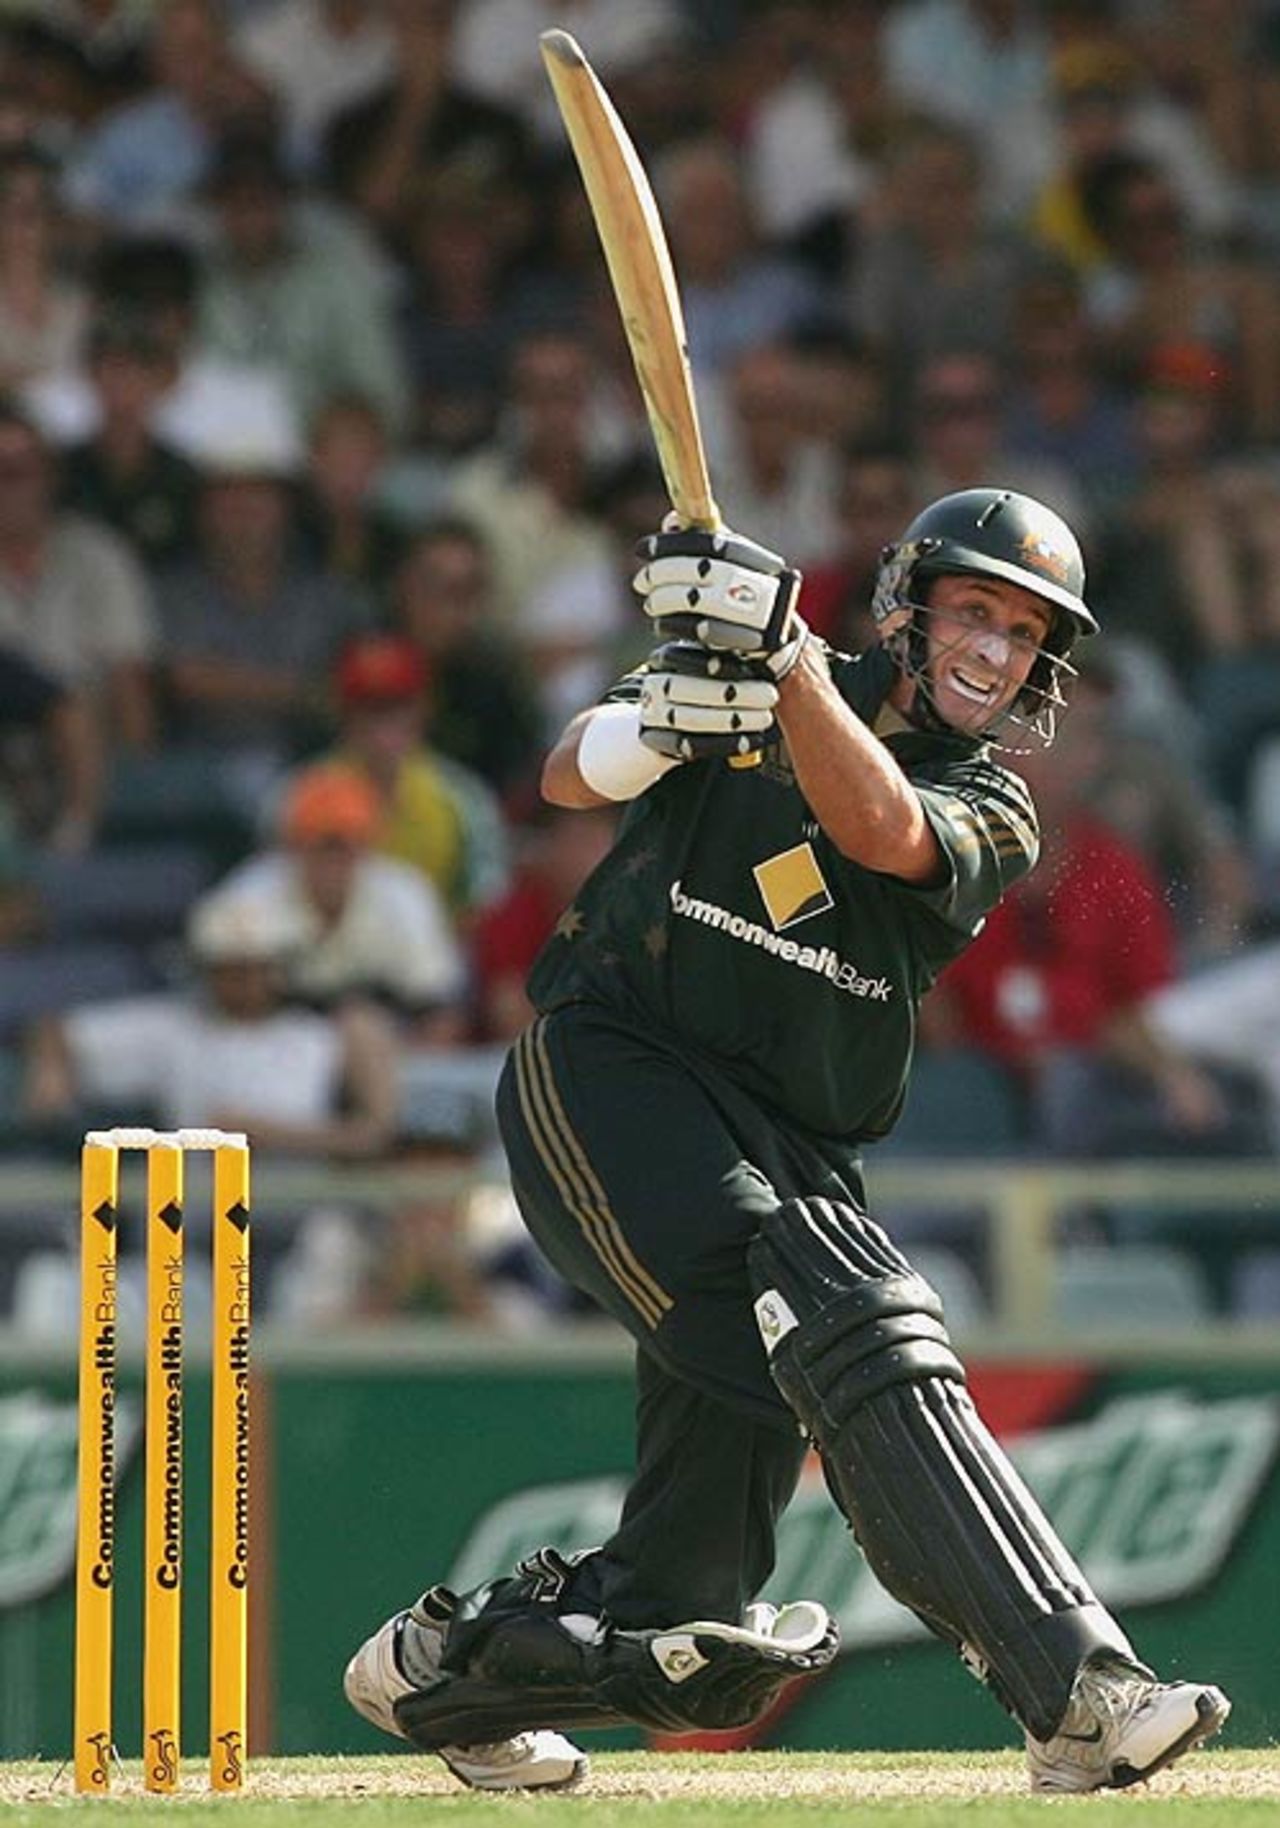 Michael Hussey hoicks one over midwicket, Australia v New Zealand, CB Series, 8th match, Perth, January 28, 2007